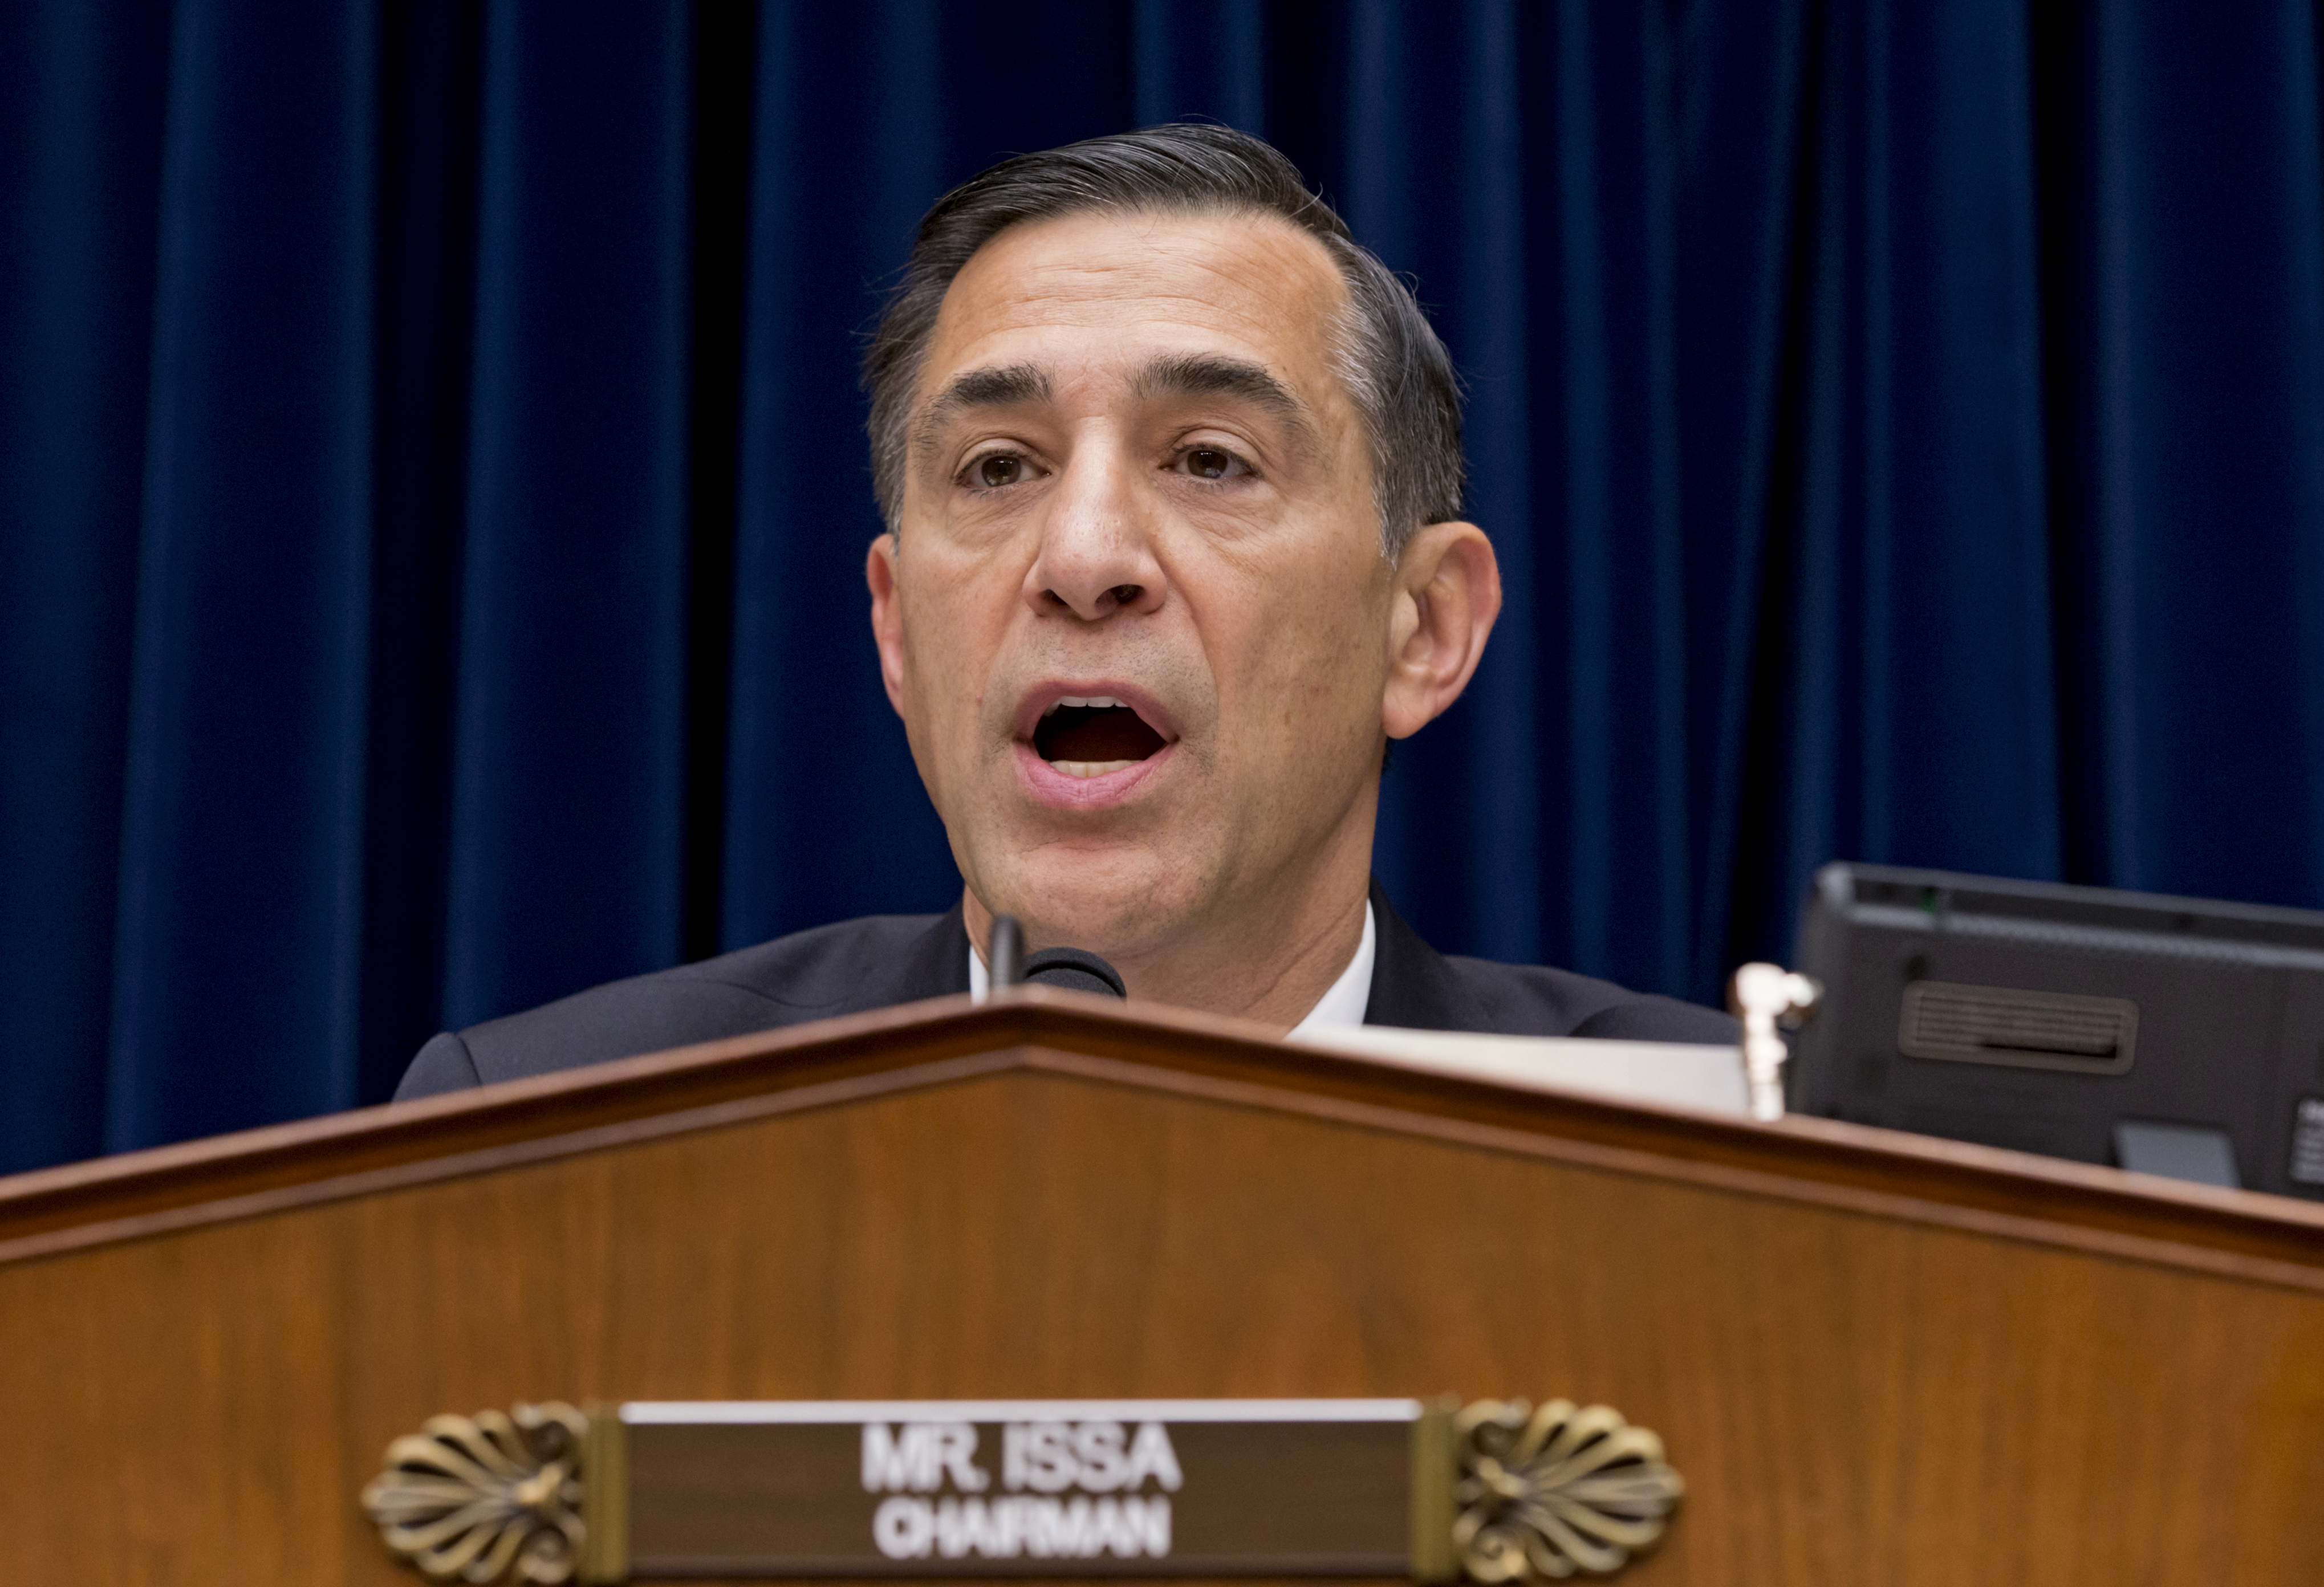 House Oversight Committee Chairman Rep. Darrell Issa, R-Calif. makes an opening statement as his panel holds its first public hearing on problems implementing the Obamacare healthcare program, on Capitol Hill in Washington, Wednesday, Nov. 13, 2013. (J. Scott Applewhite—AP)